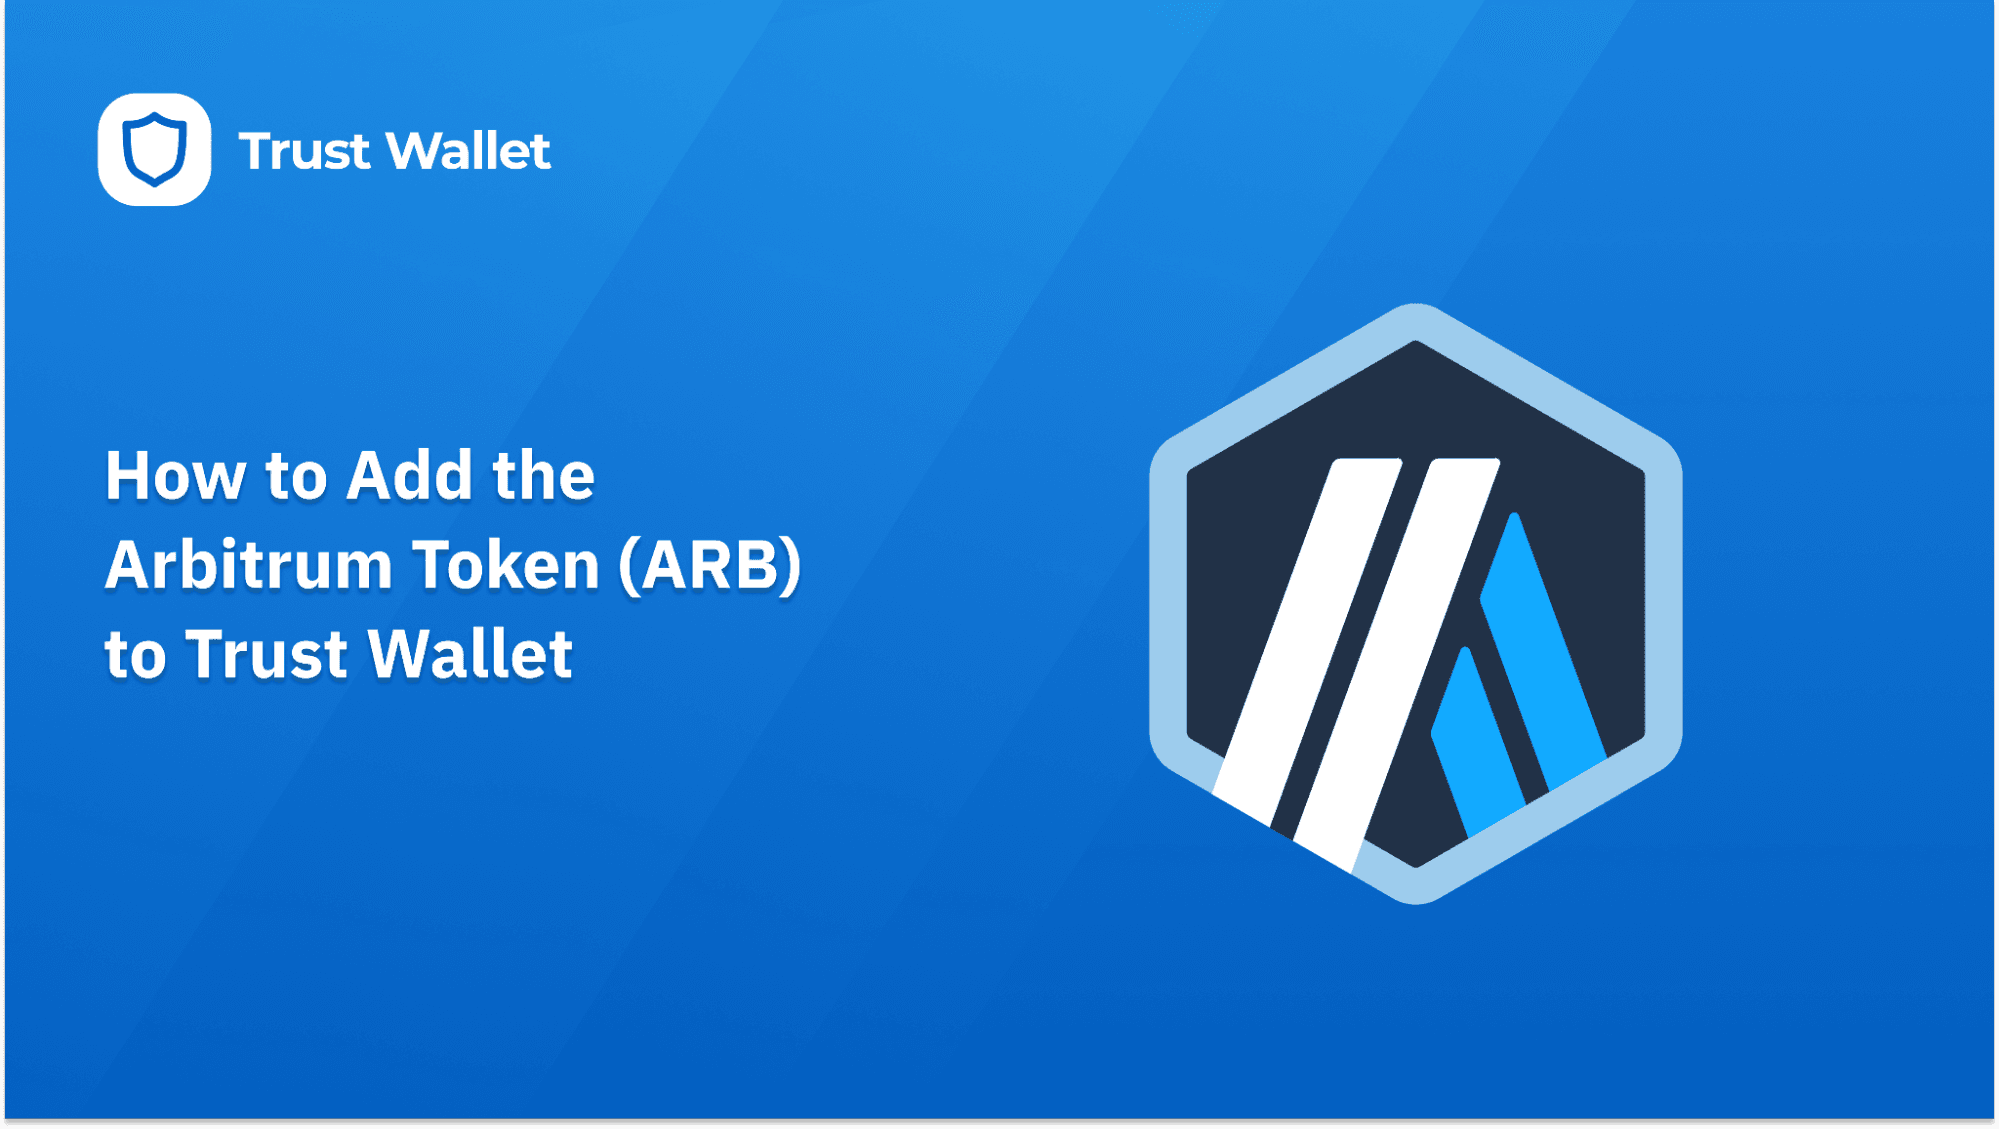 How to Add the Arbitrum (ARB) Token to Trust Wallet